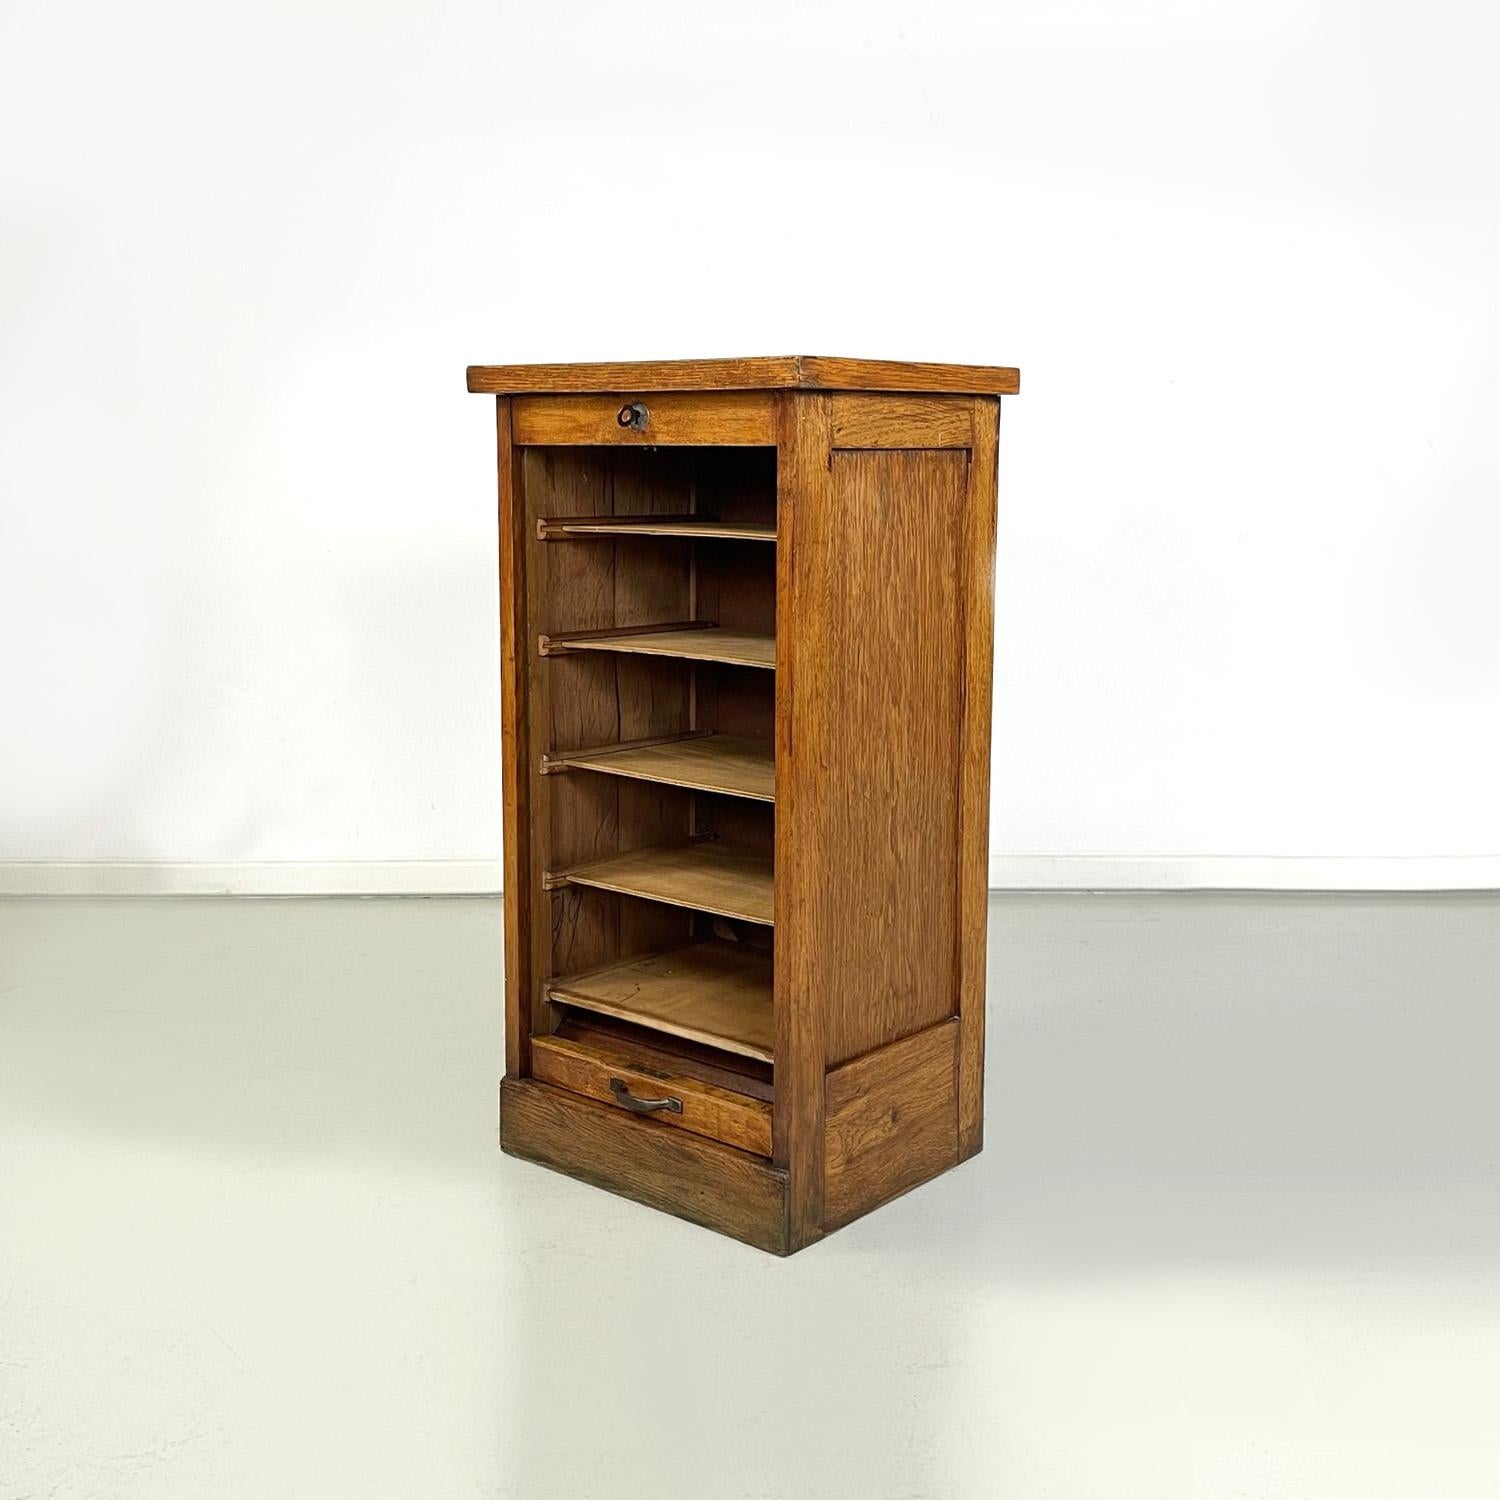 Italian Wooden archive cabinet with a shutter opening and metal handle, 1940s
Office filing archive cabinet with rectangular wooden base. It has a shutter opening, on the inside there are several shelves. The opening handle is made of metal. Key